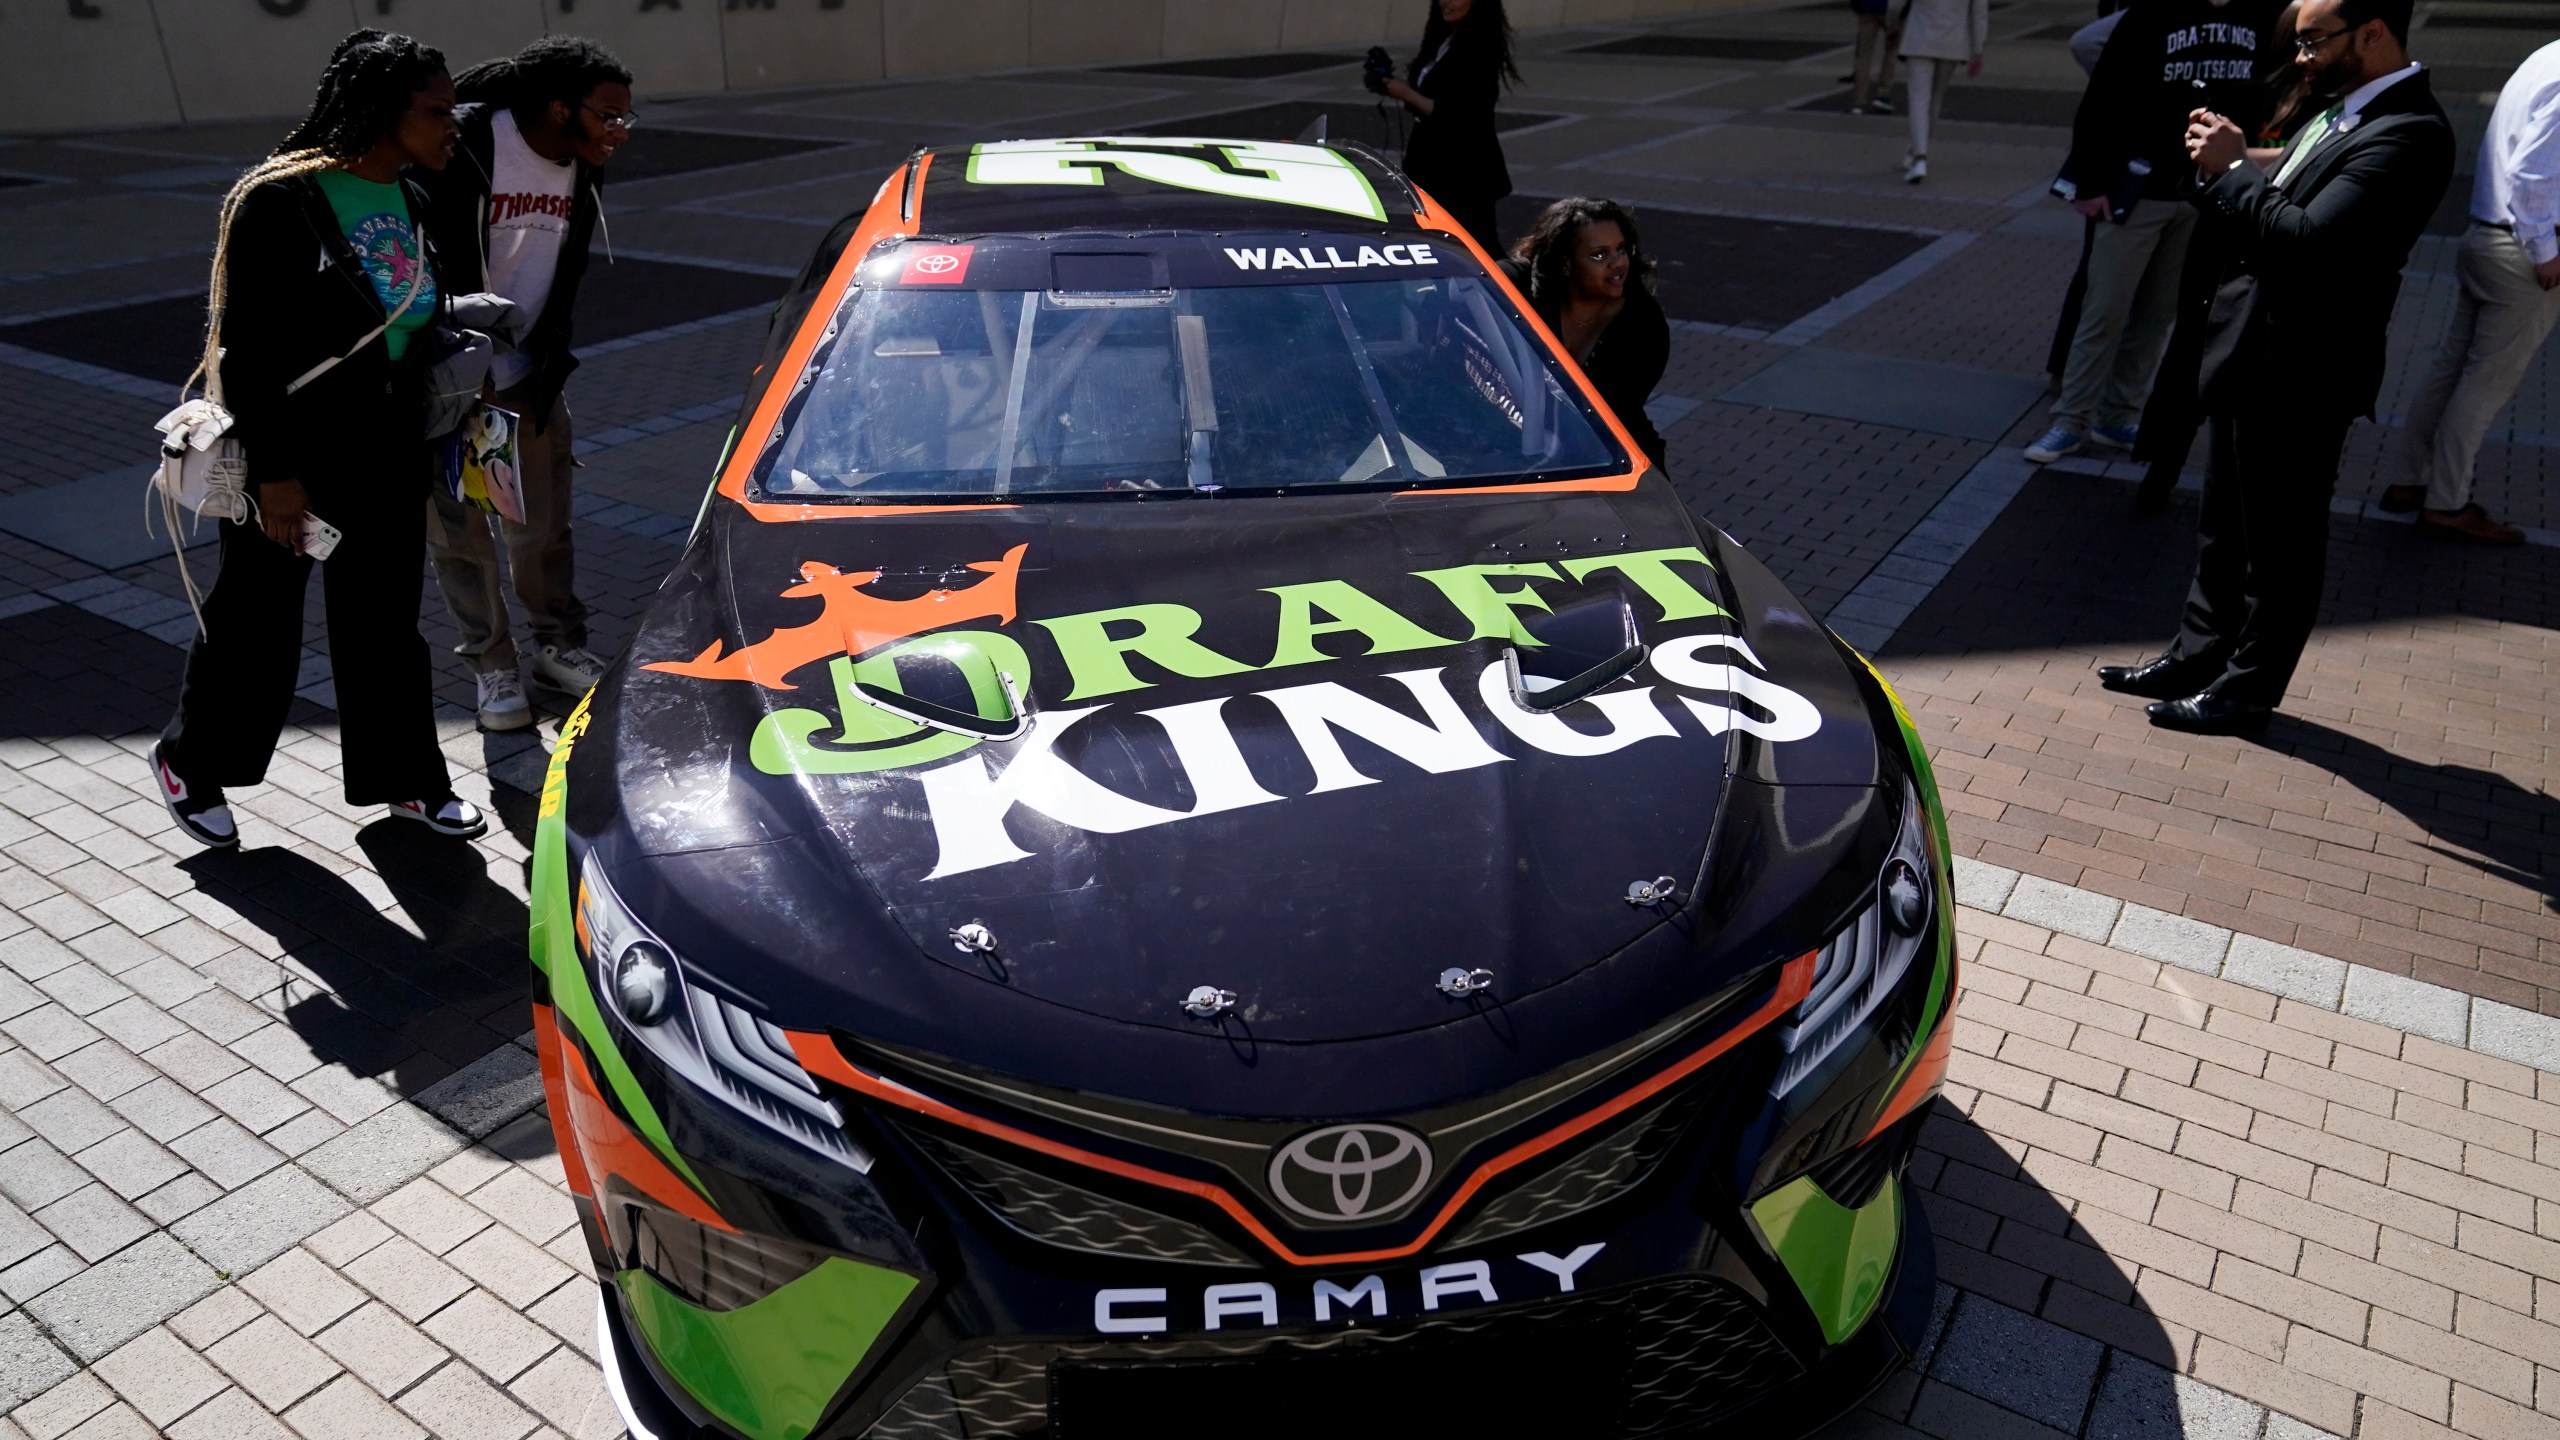 The DraftKings's Bubba Wallace NASCAR car is displayed outside the NASCAR Hall of Fame during an event celebrating the launch of mobile and online sports wagering across North Carolina, Monday, March 11, 2024, in Charlotte, N.C. (AP Photo/Erik Verduzco)